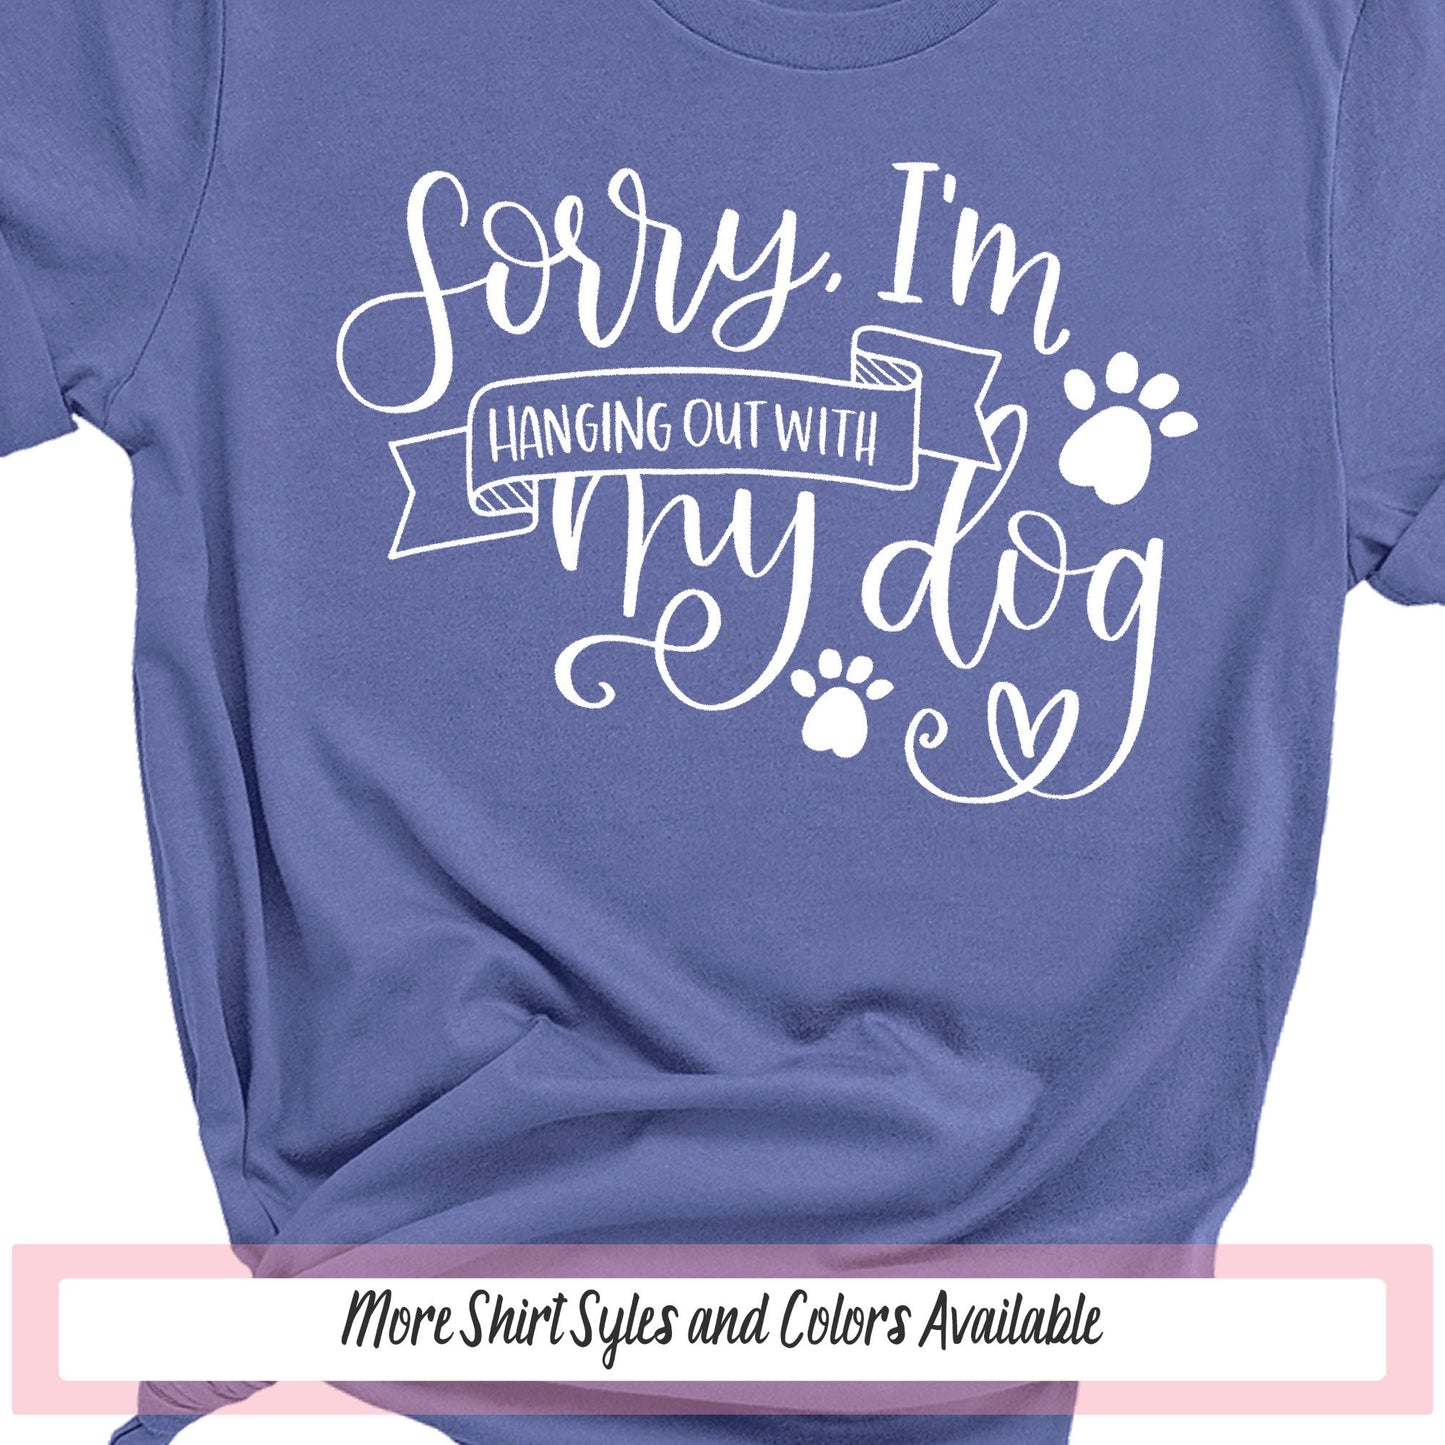 Sorry I'm Hanging Out With My Dog, Dog Lover Tshirt, Love My Dog, Dog Owner Gift, Dog Mom Tshirt, Dog Mom Gift, Dog Lover Gift, Dog Walker